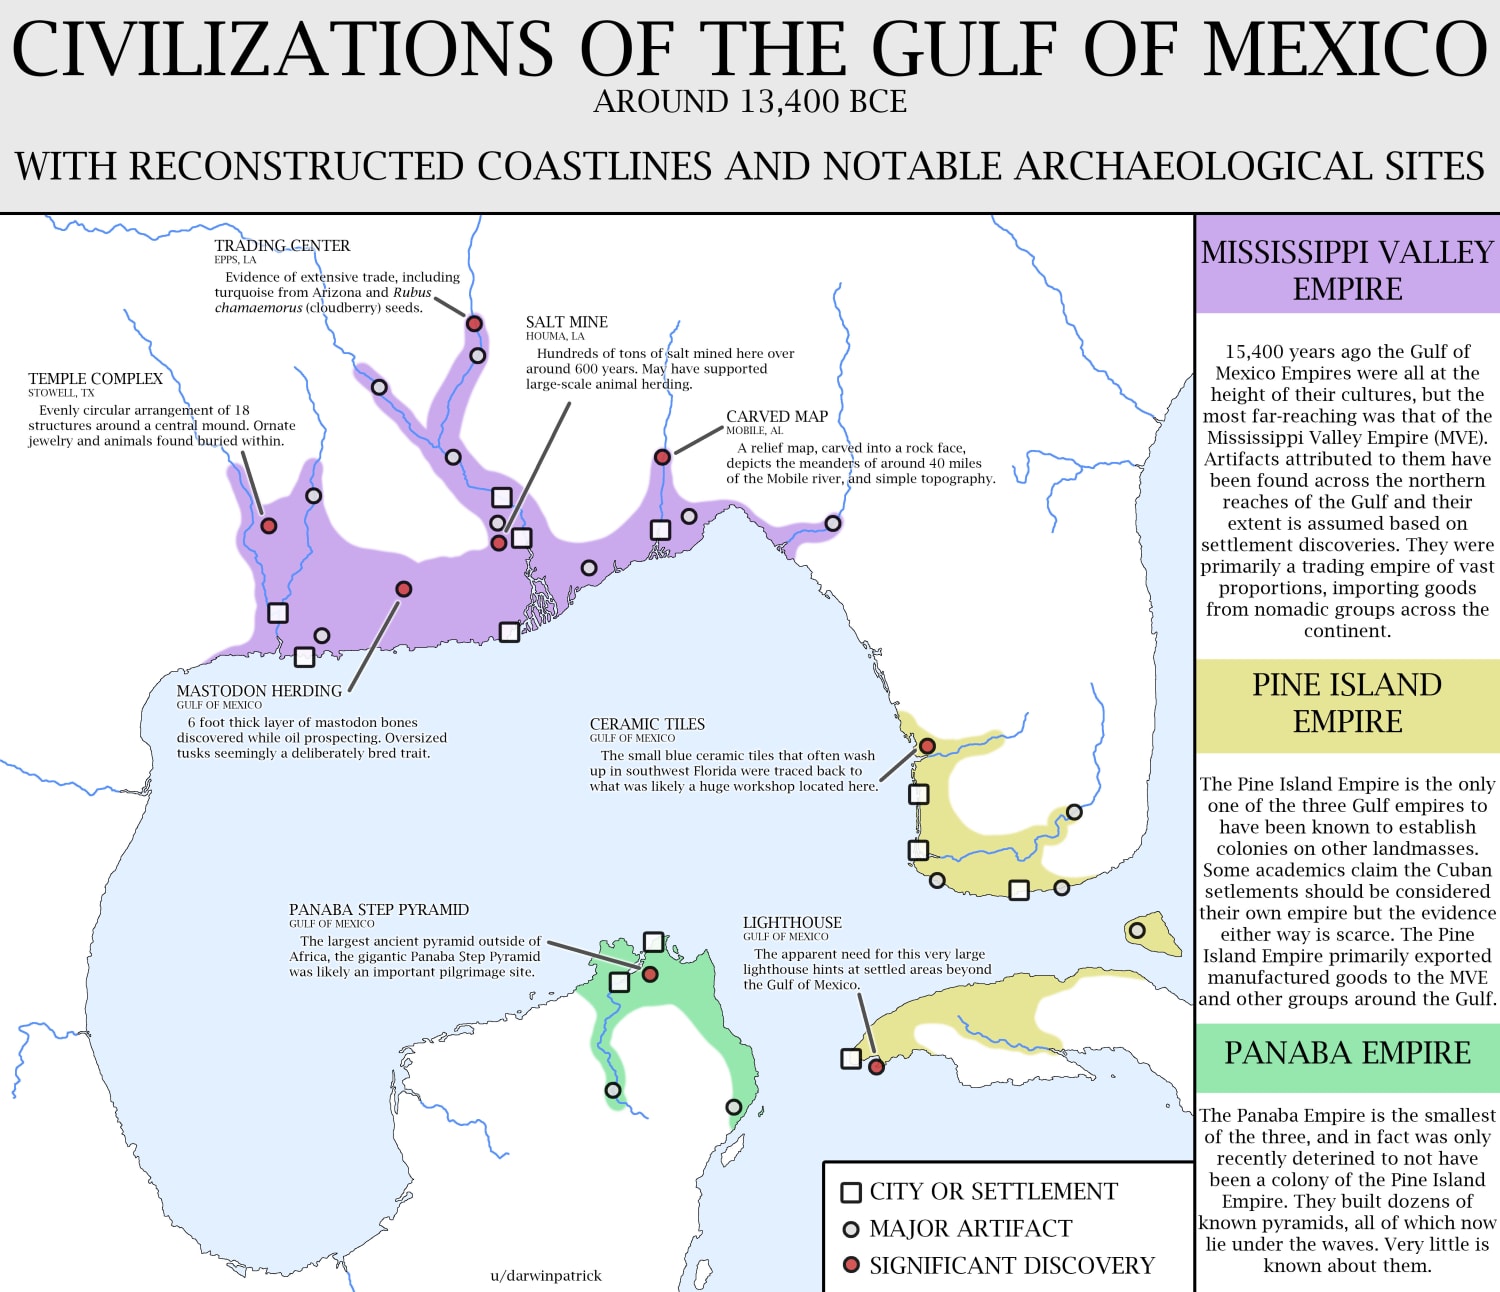 Civilizations of the Gulf of Mexico, with reconstructed coastlines and notable archaeological sites- 13,400 BCE